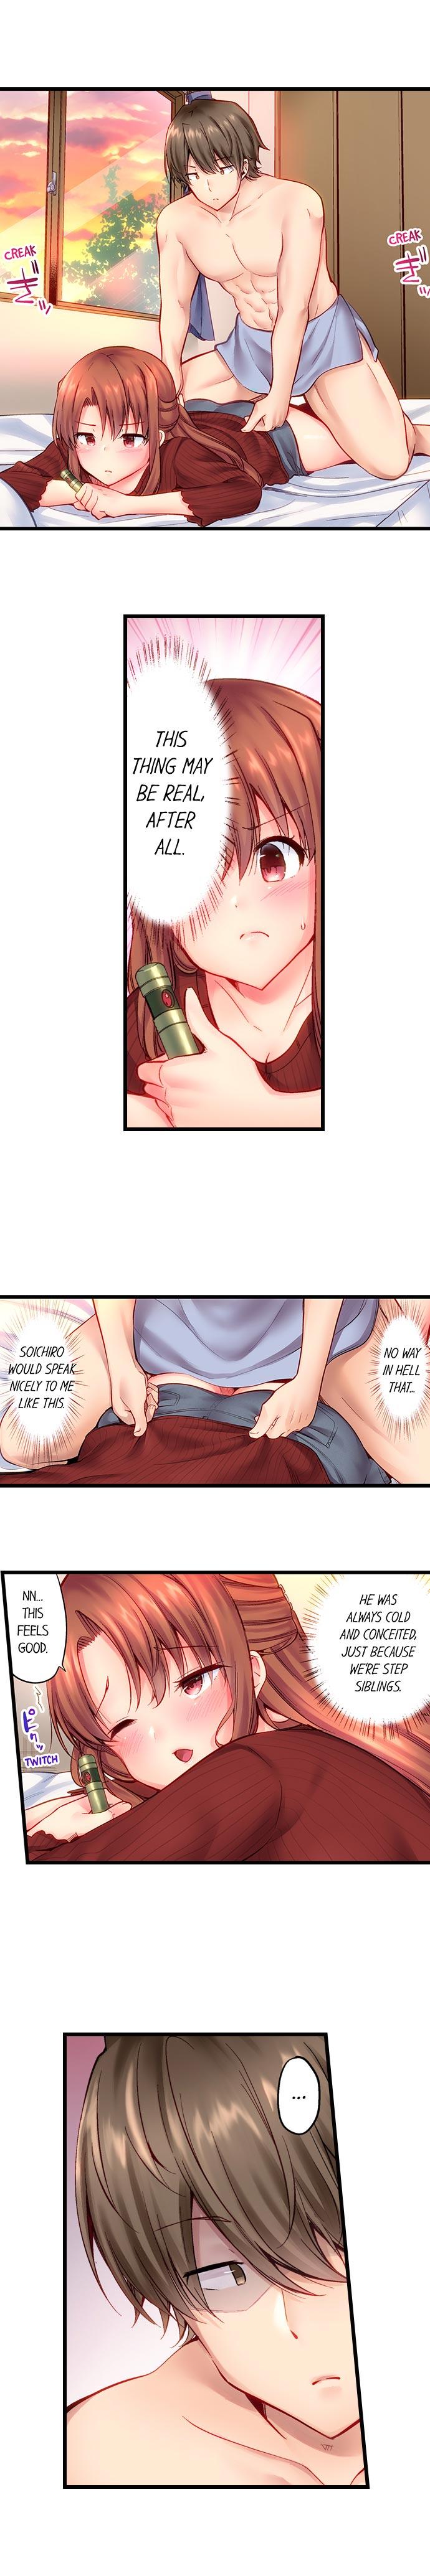 "Hypnotized" Sex with My Brother Ch.4/? 9